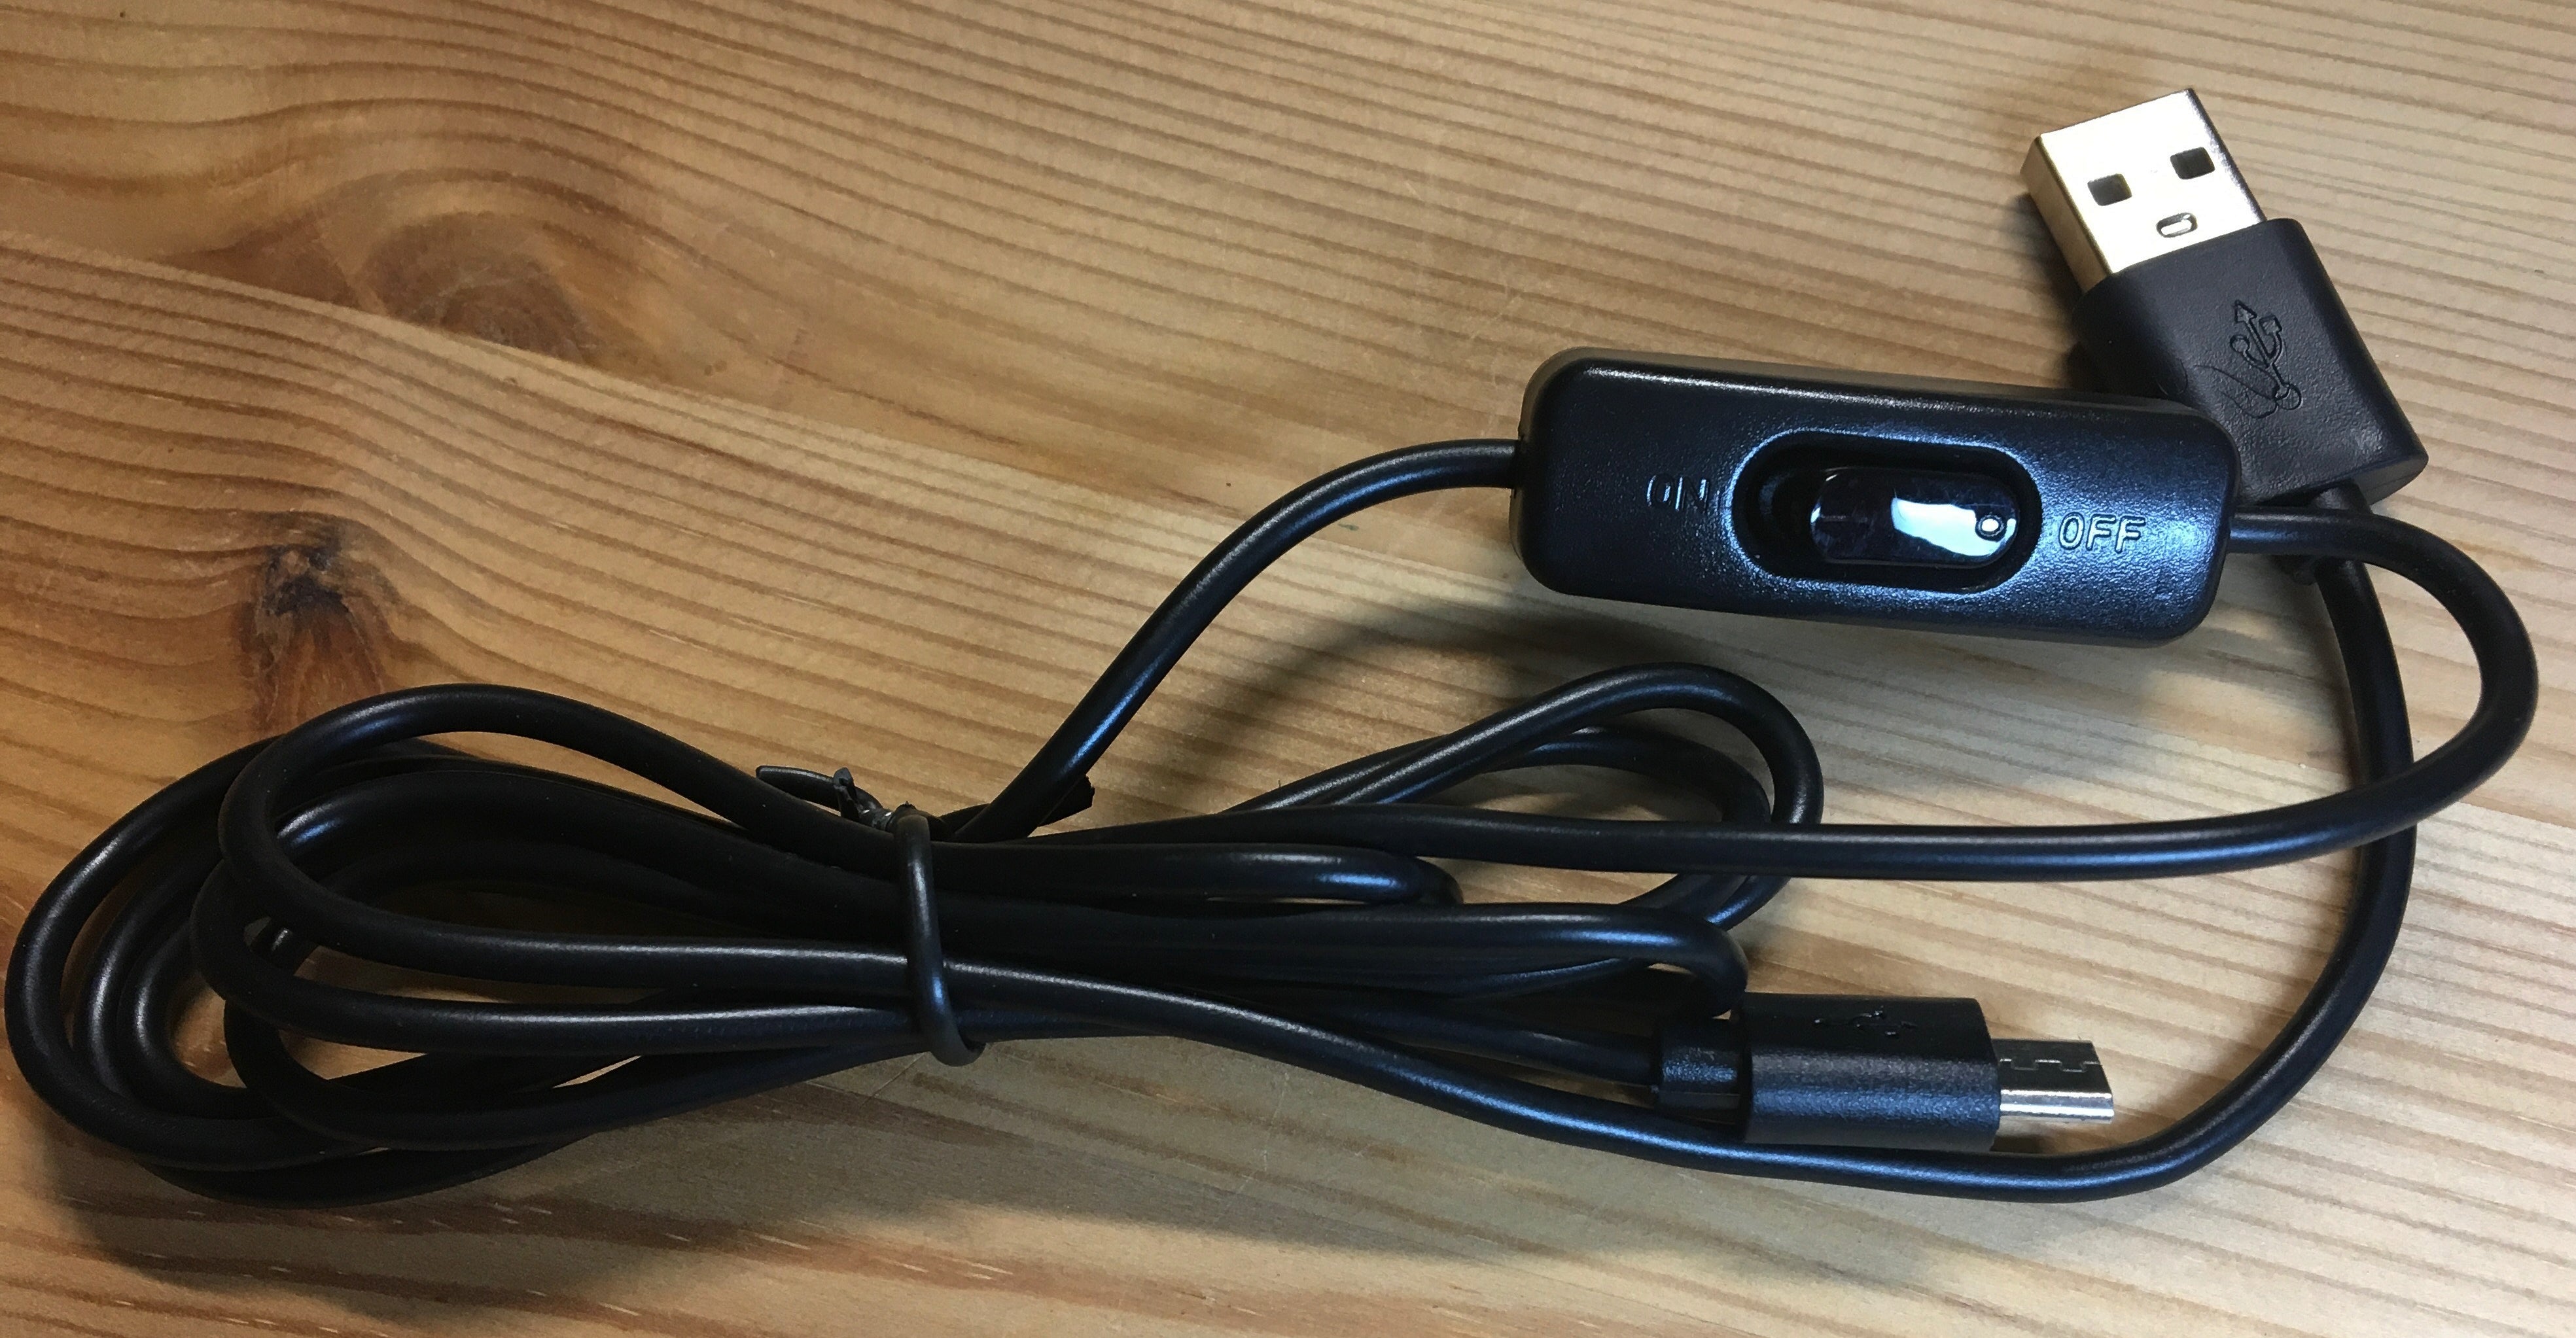 USB Micro Charging Cable with inline on/off switch - Server On The Move